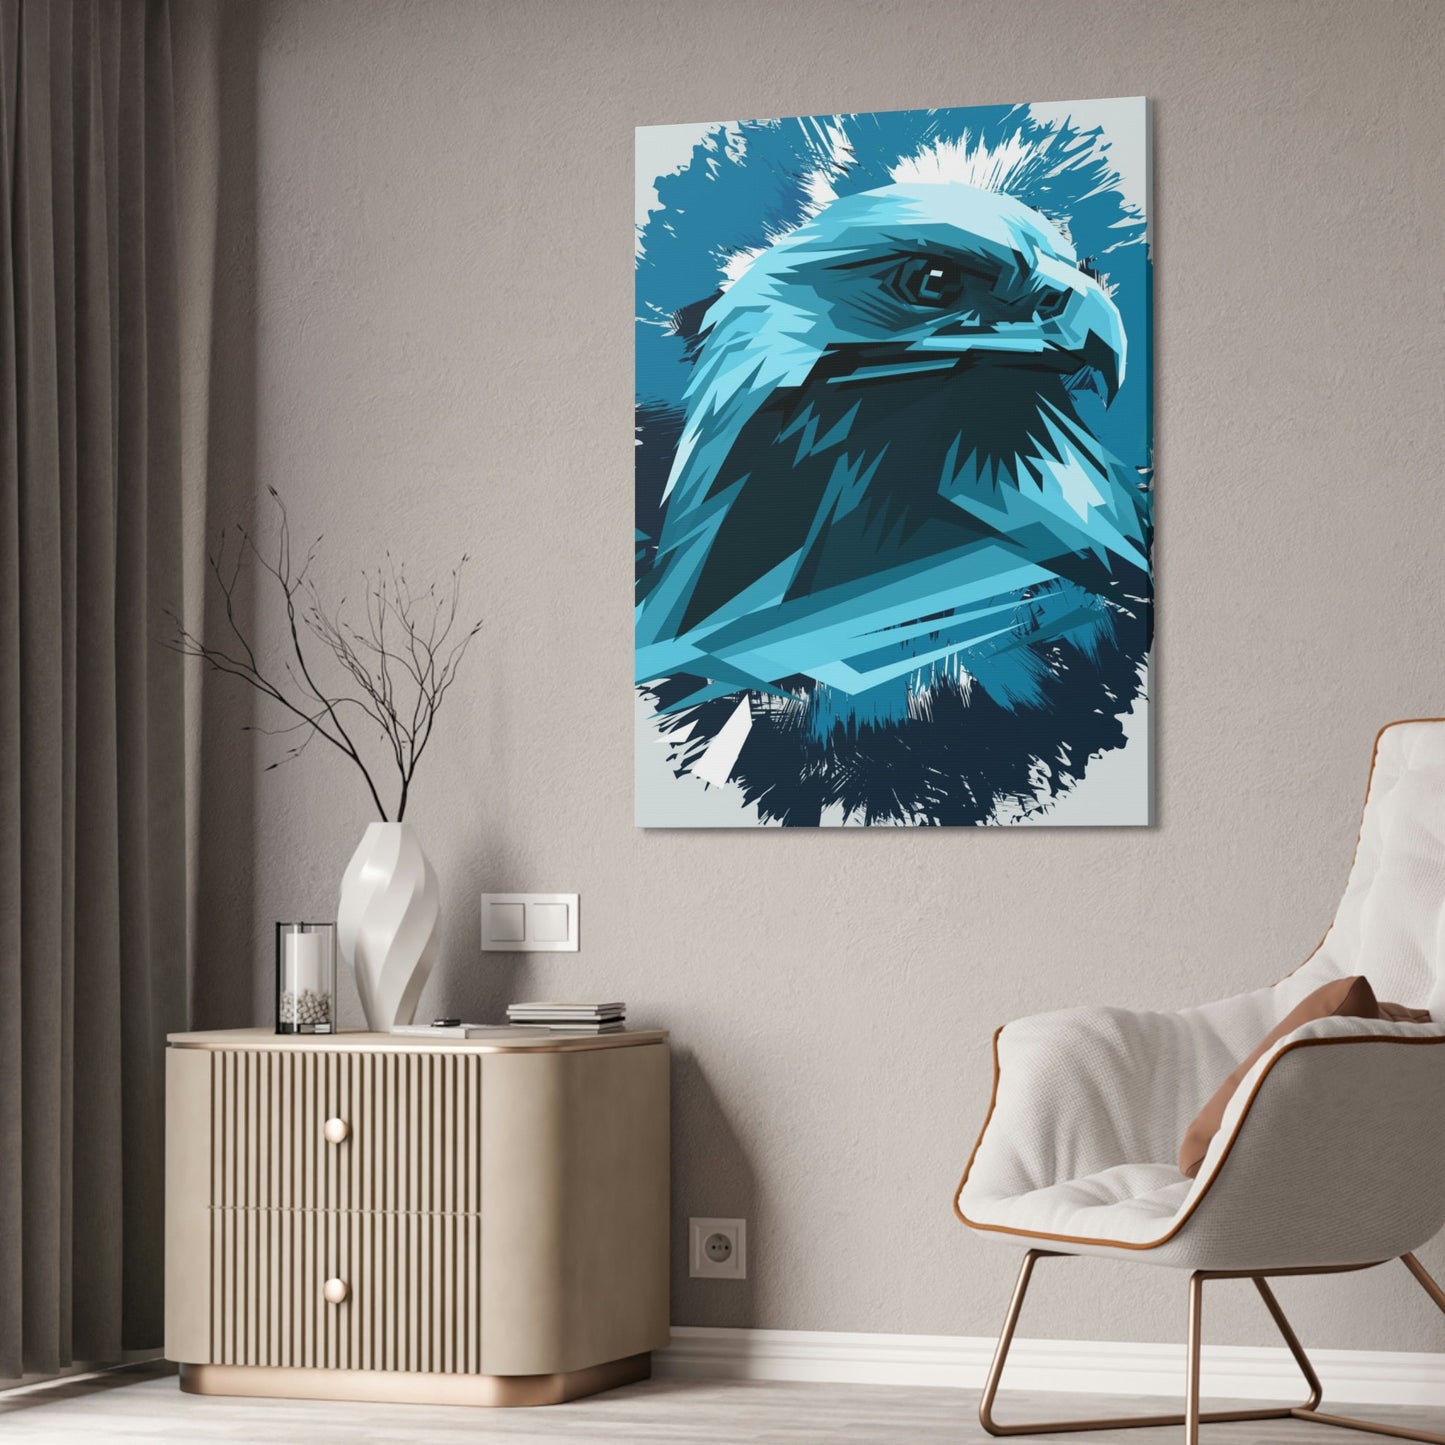 Eagle's Resplendence: Canvas Wall Art, Immersing in their Radiant Glory